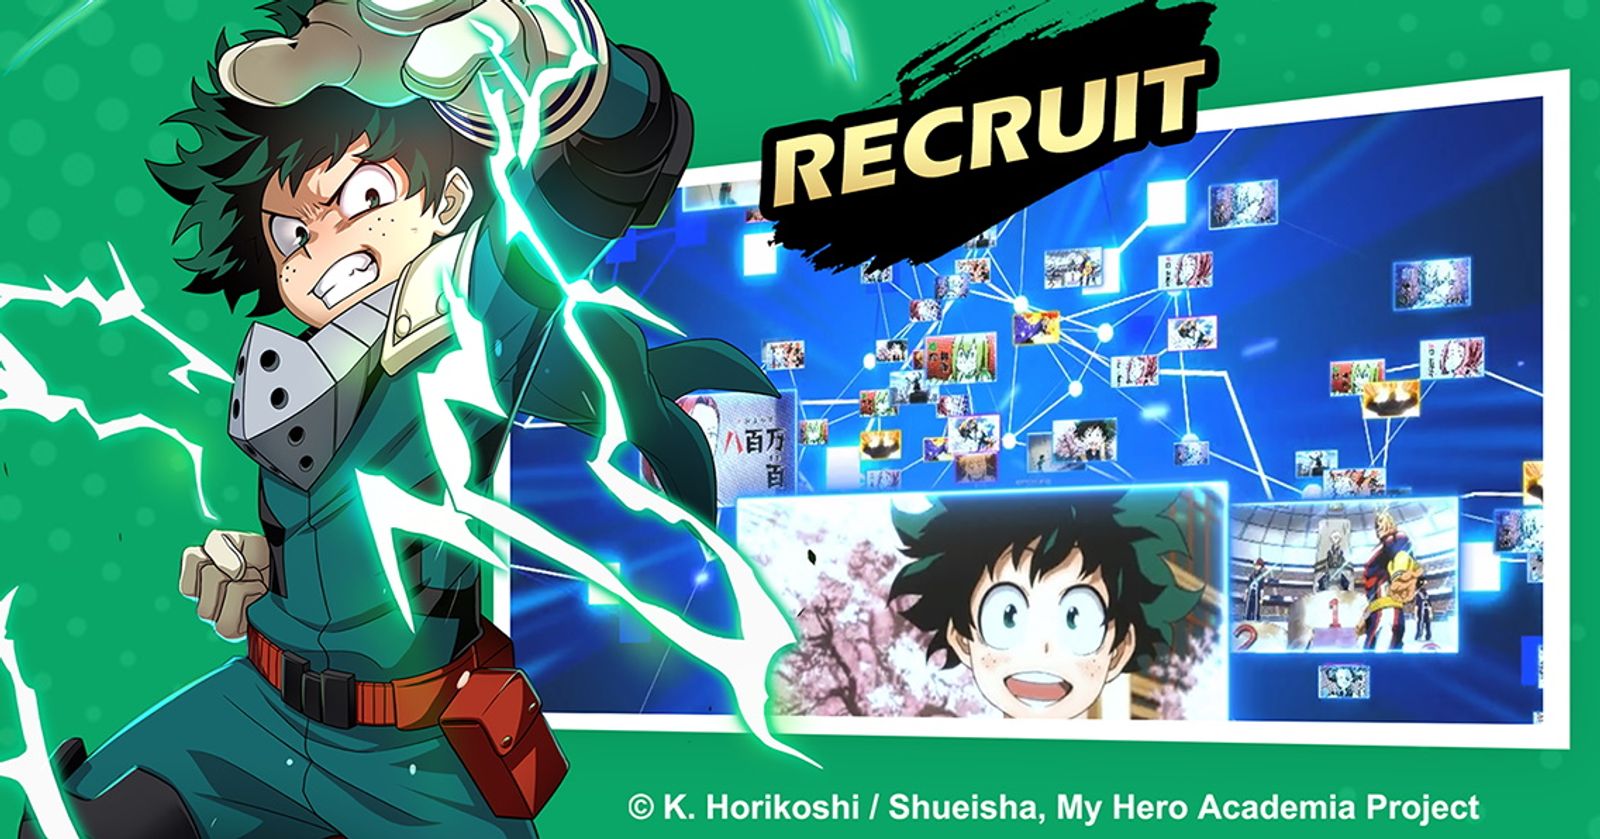 My Hero Academia: The Strongest Hero (Official) - English Version Gameplay  (Android/IOS) 